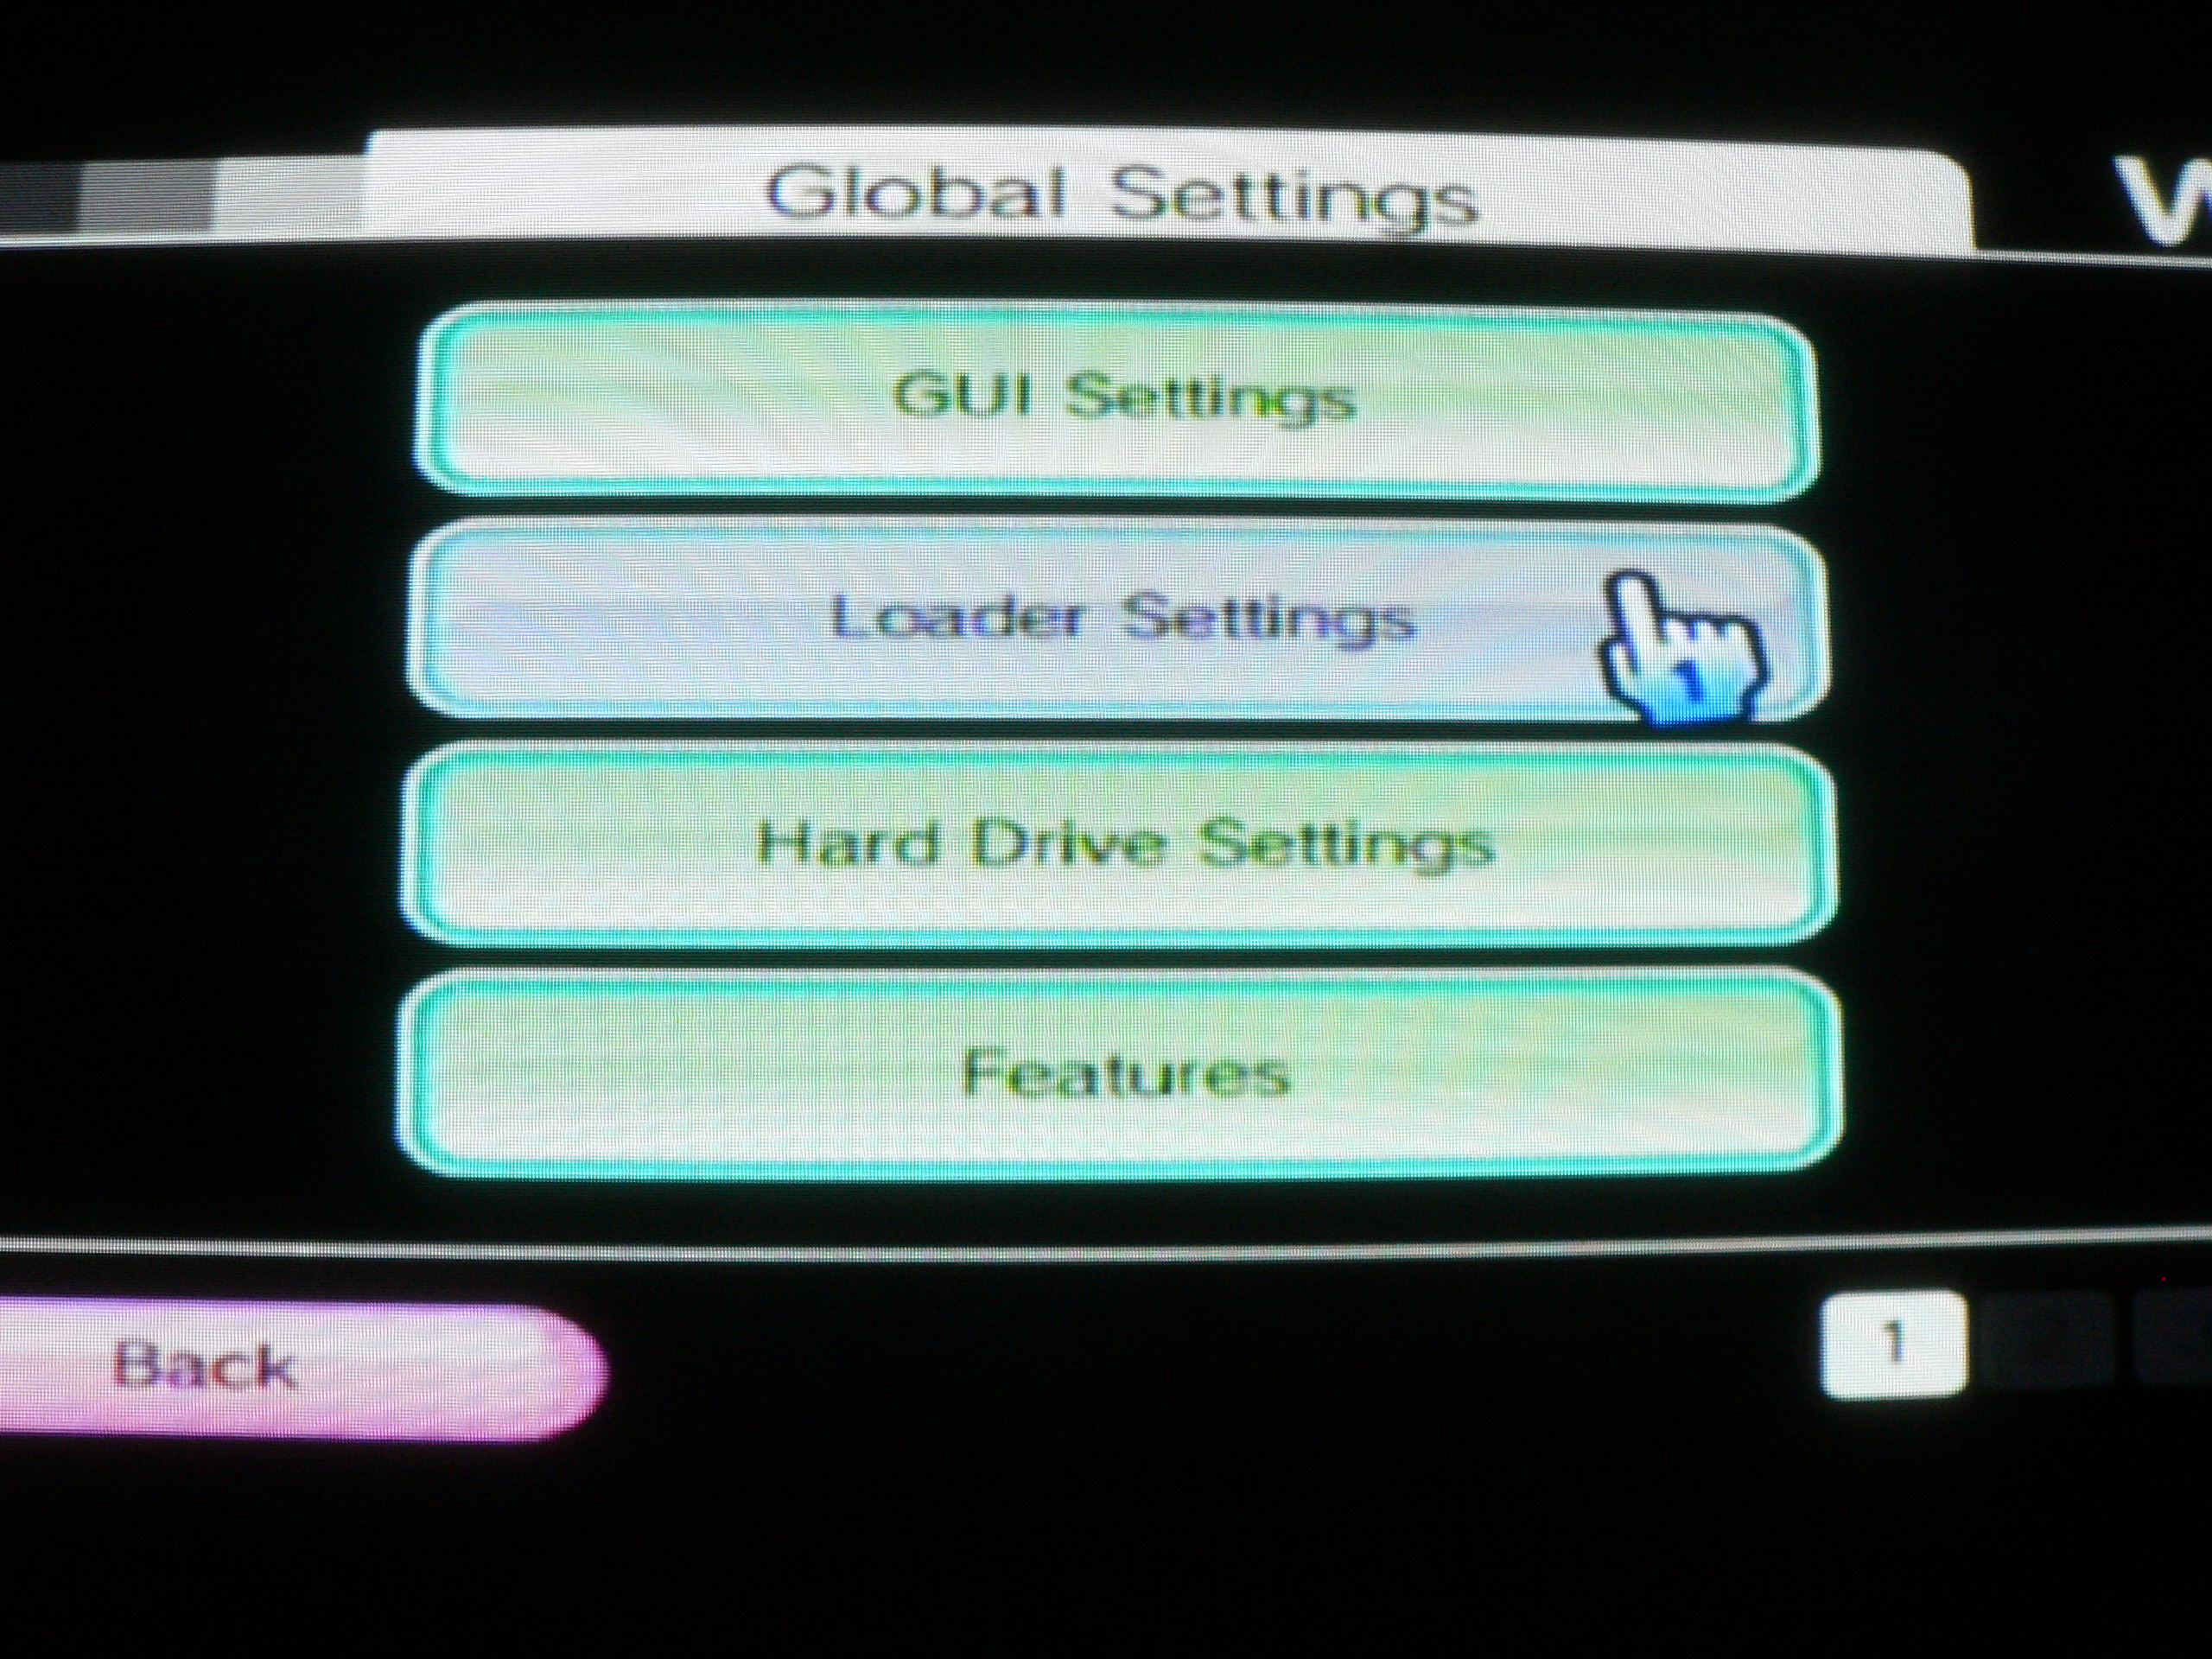 UsbLoaderGX Crashes/Goes to Homebrew Channel on Original Wii. | GBAtemp.net  - The Independent Video Game Community